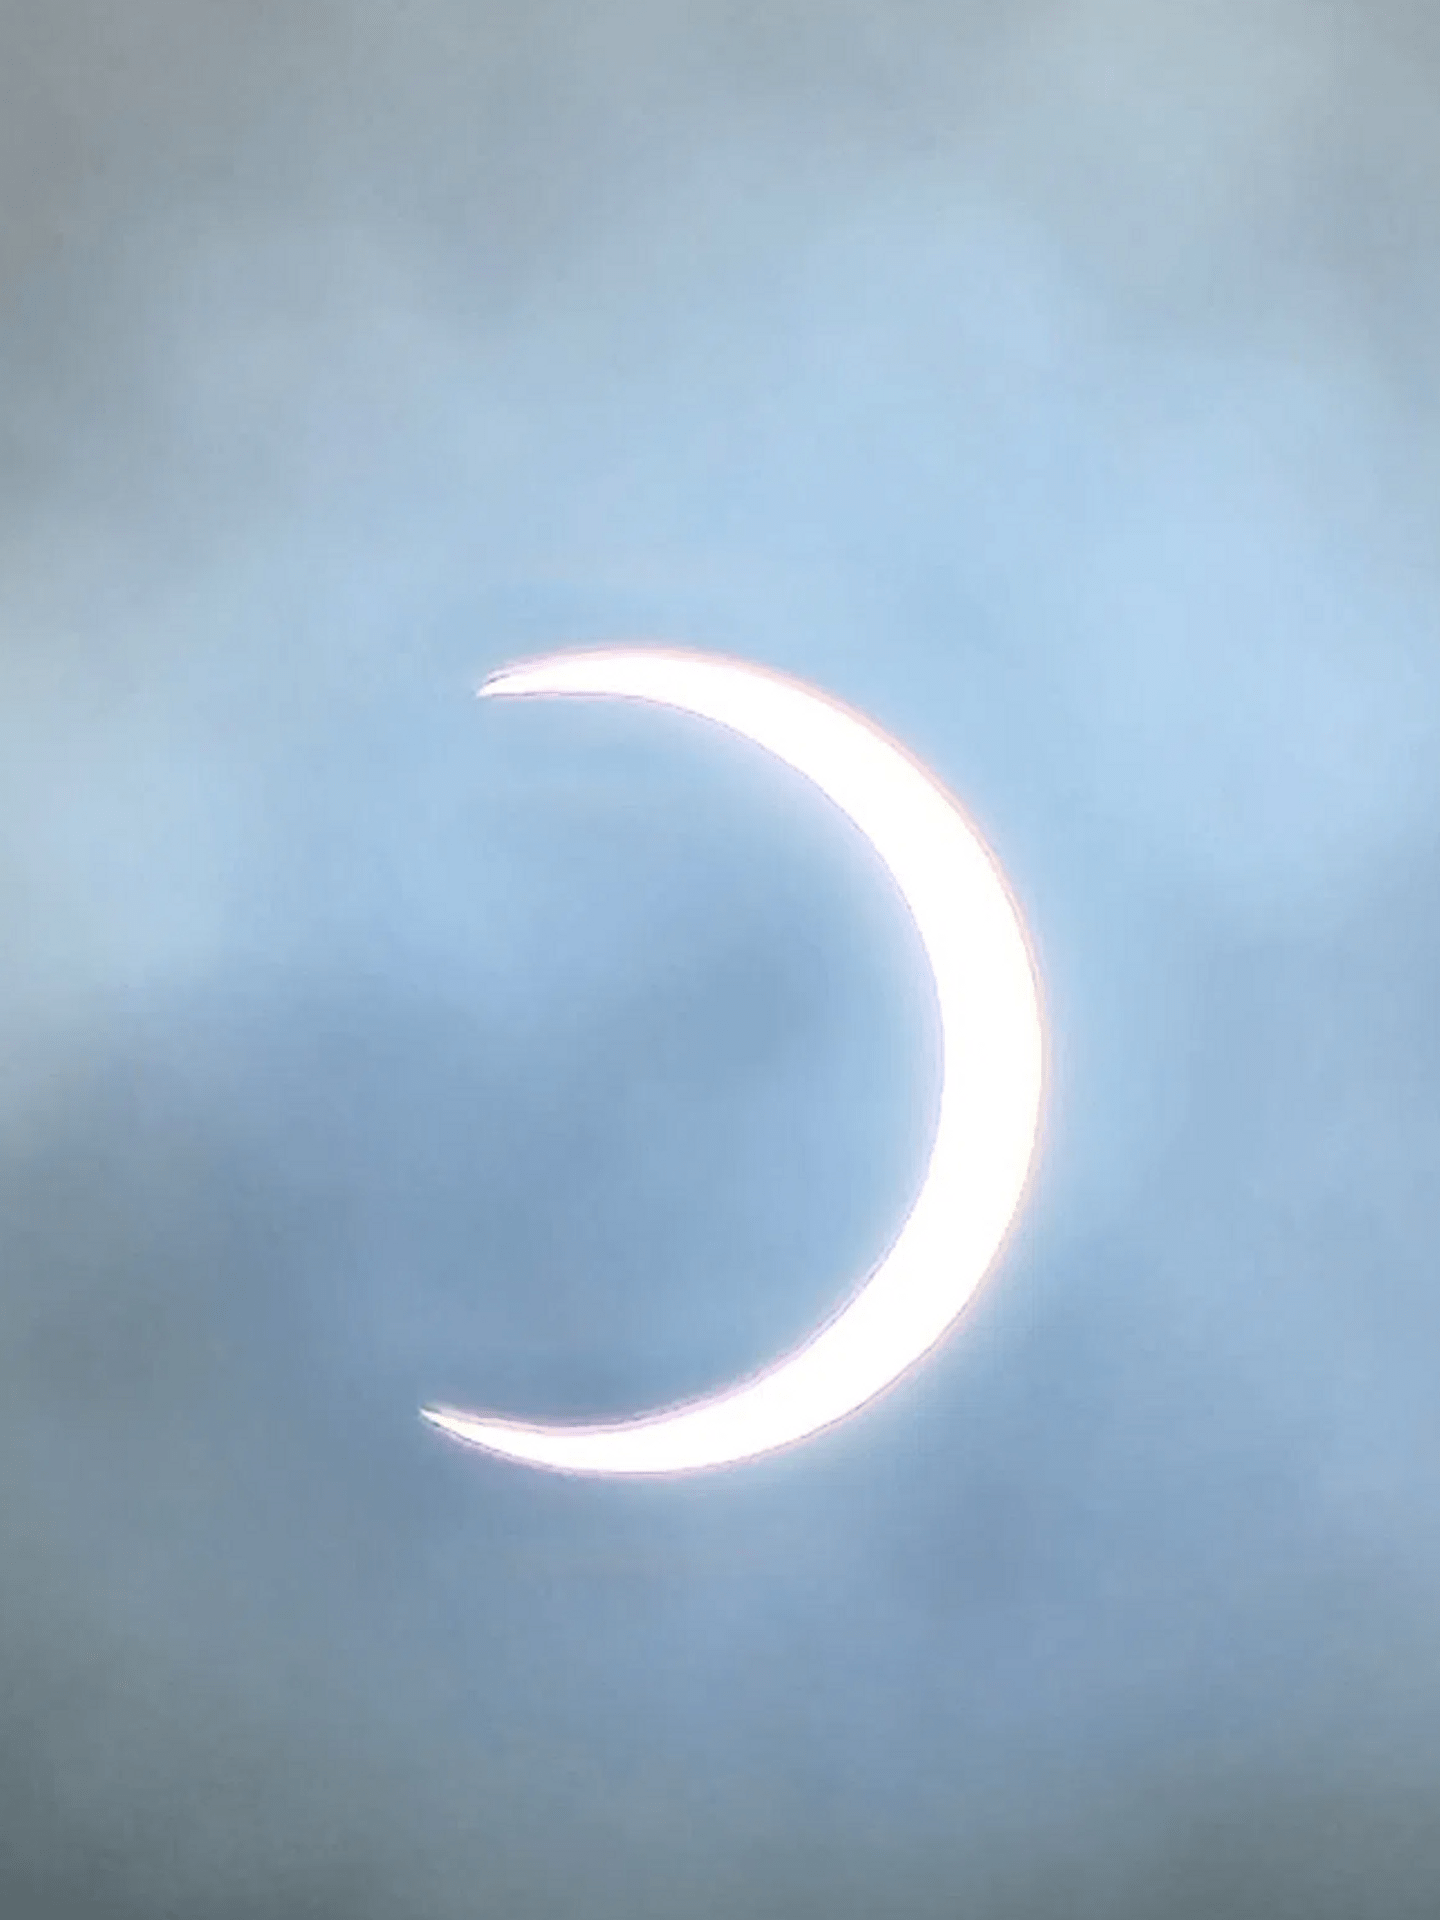 GALLERY: A Look At Saturday Morning's Cloud Covered Eclipse From Across The Northstate